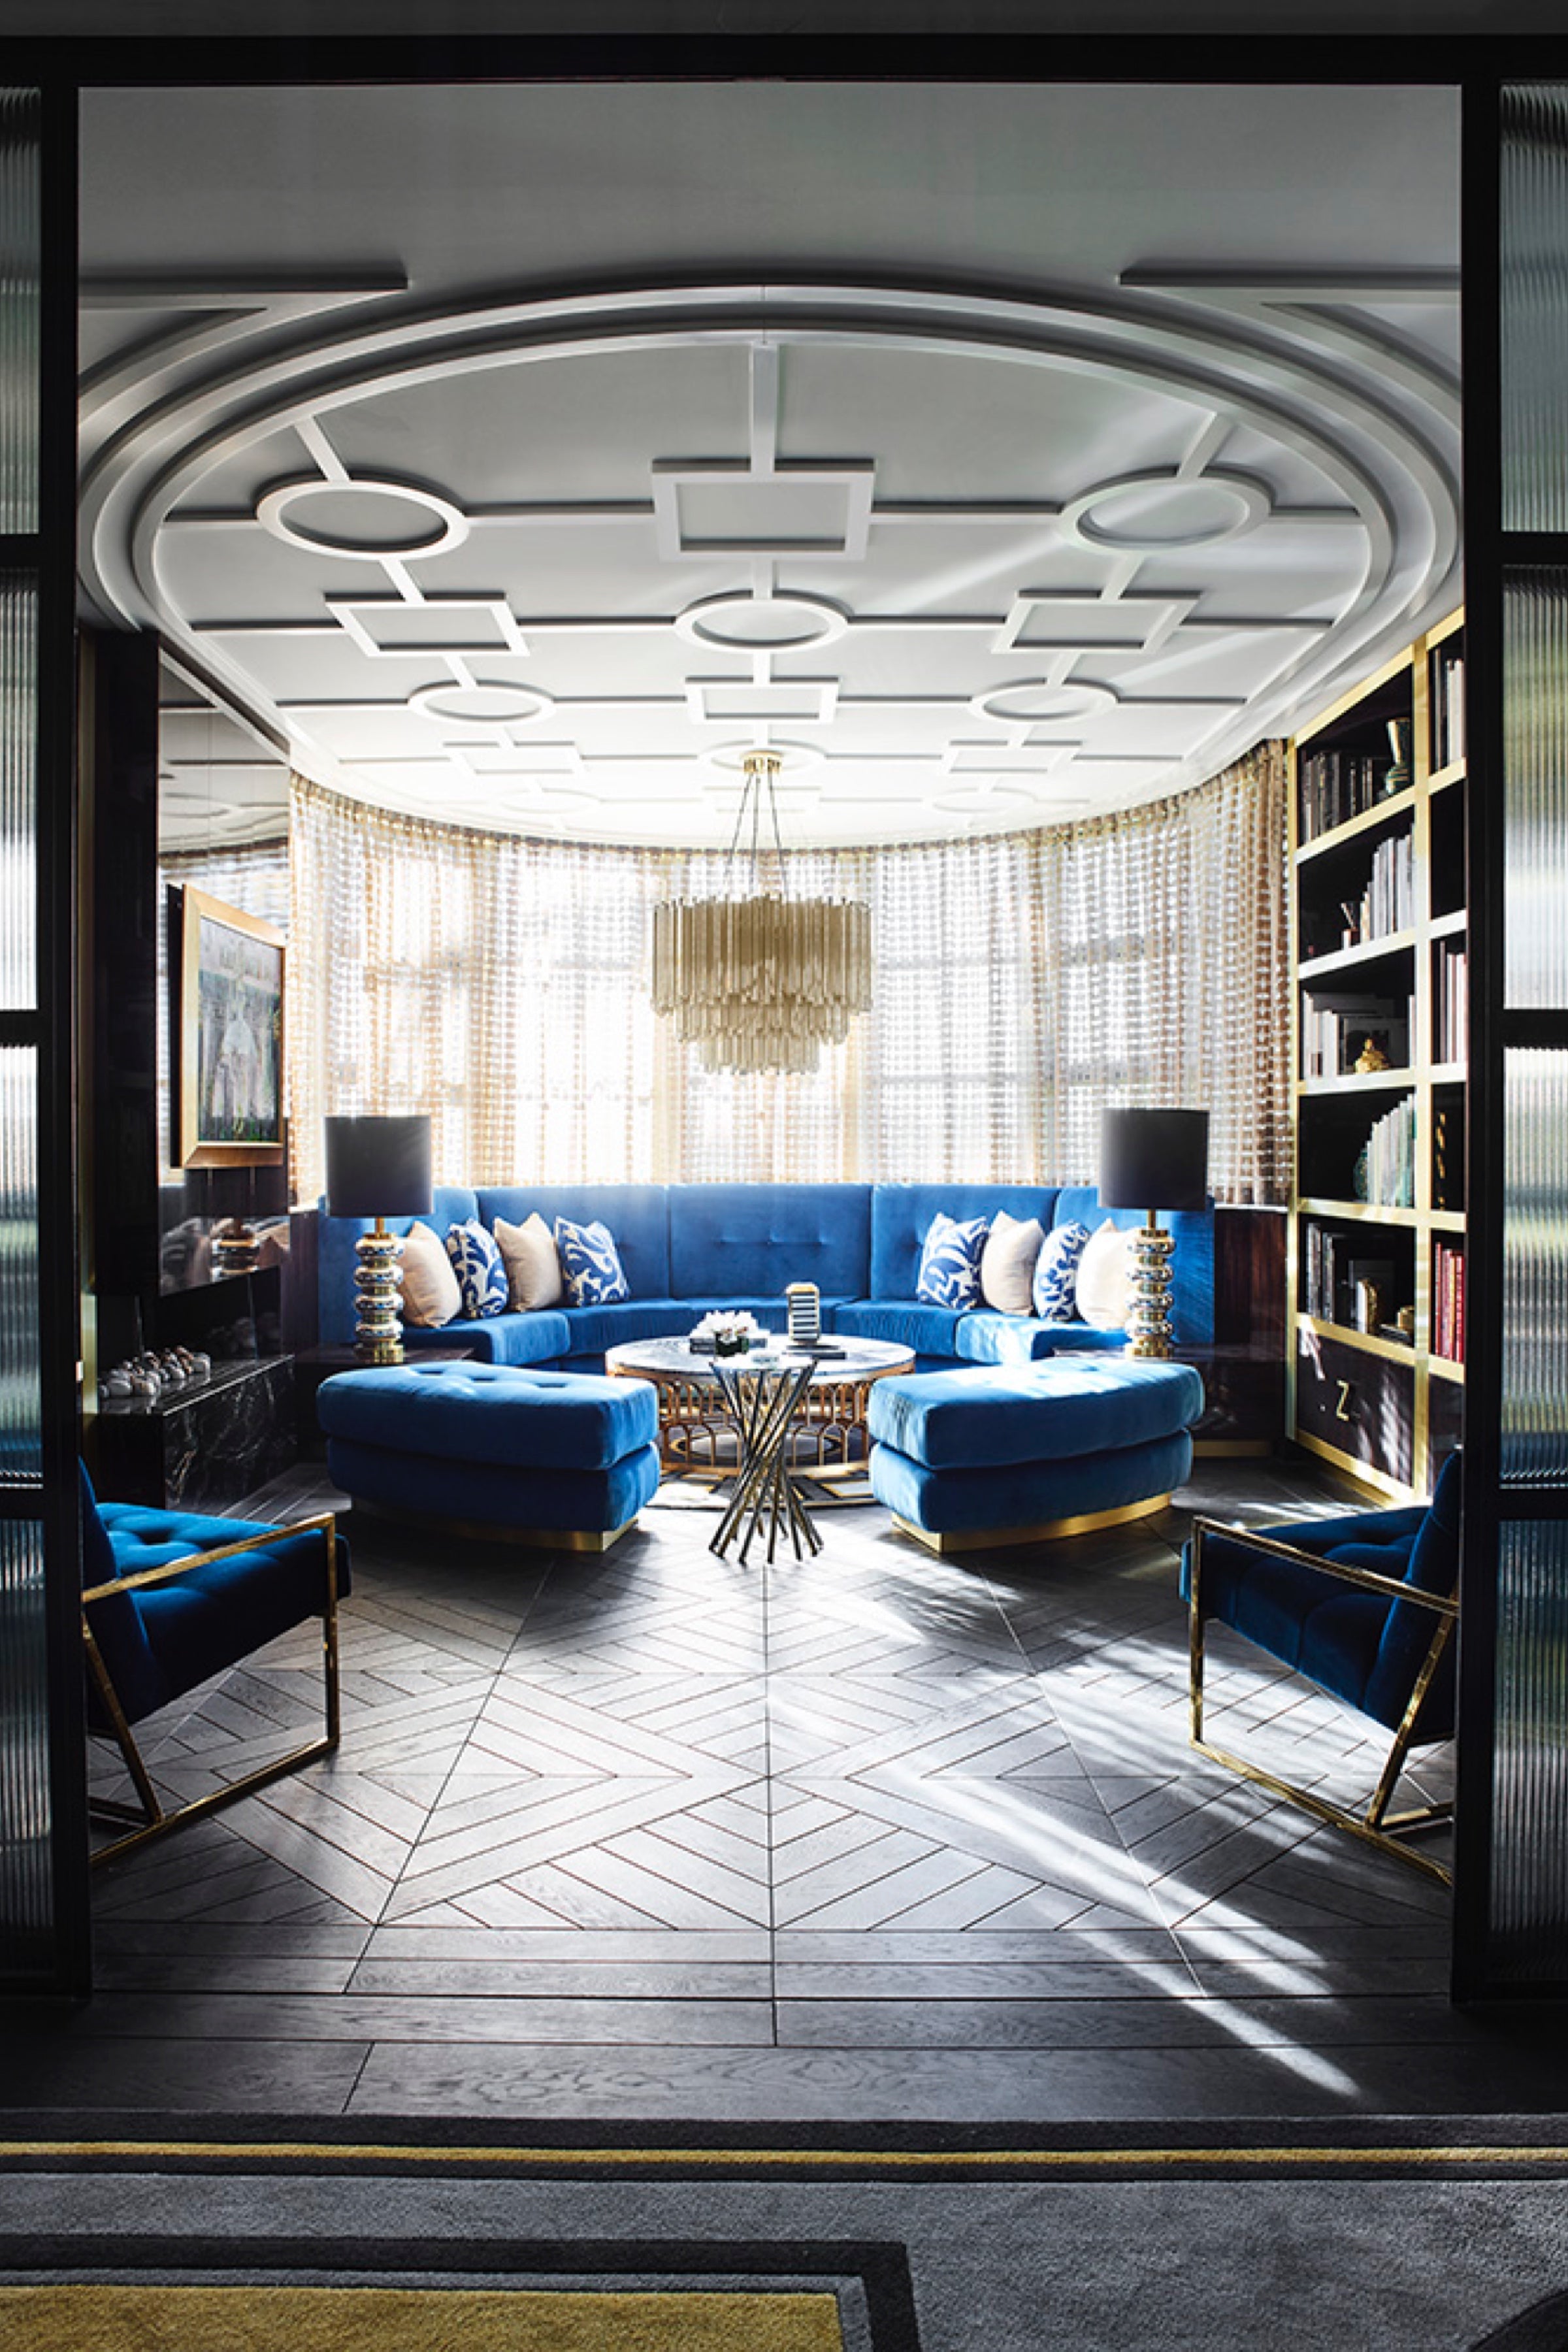 Living room with blue curved sofa and geometric ceiling design